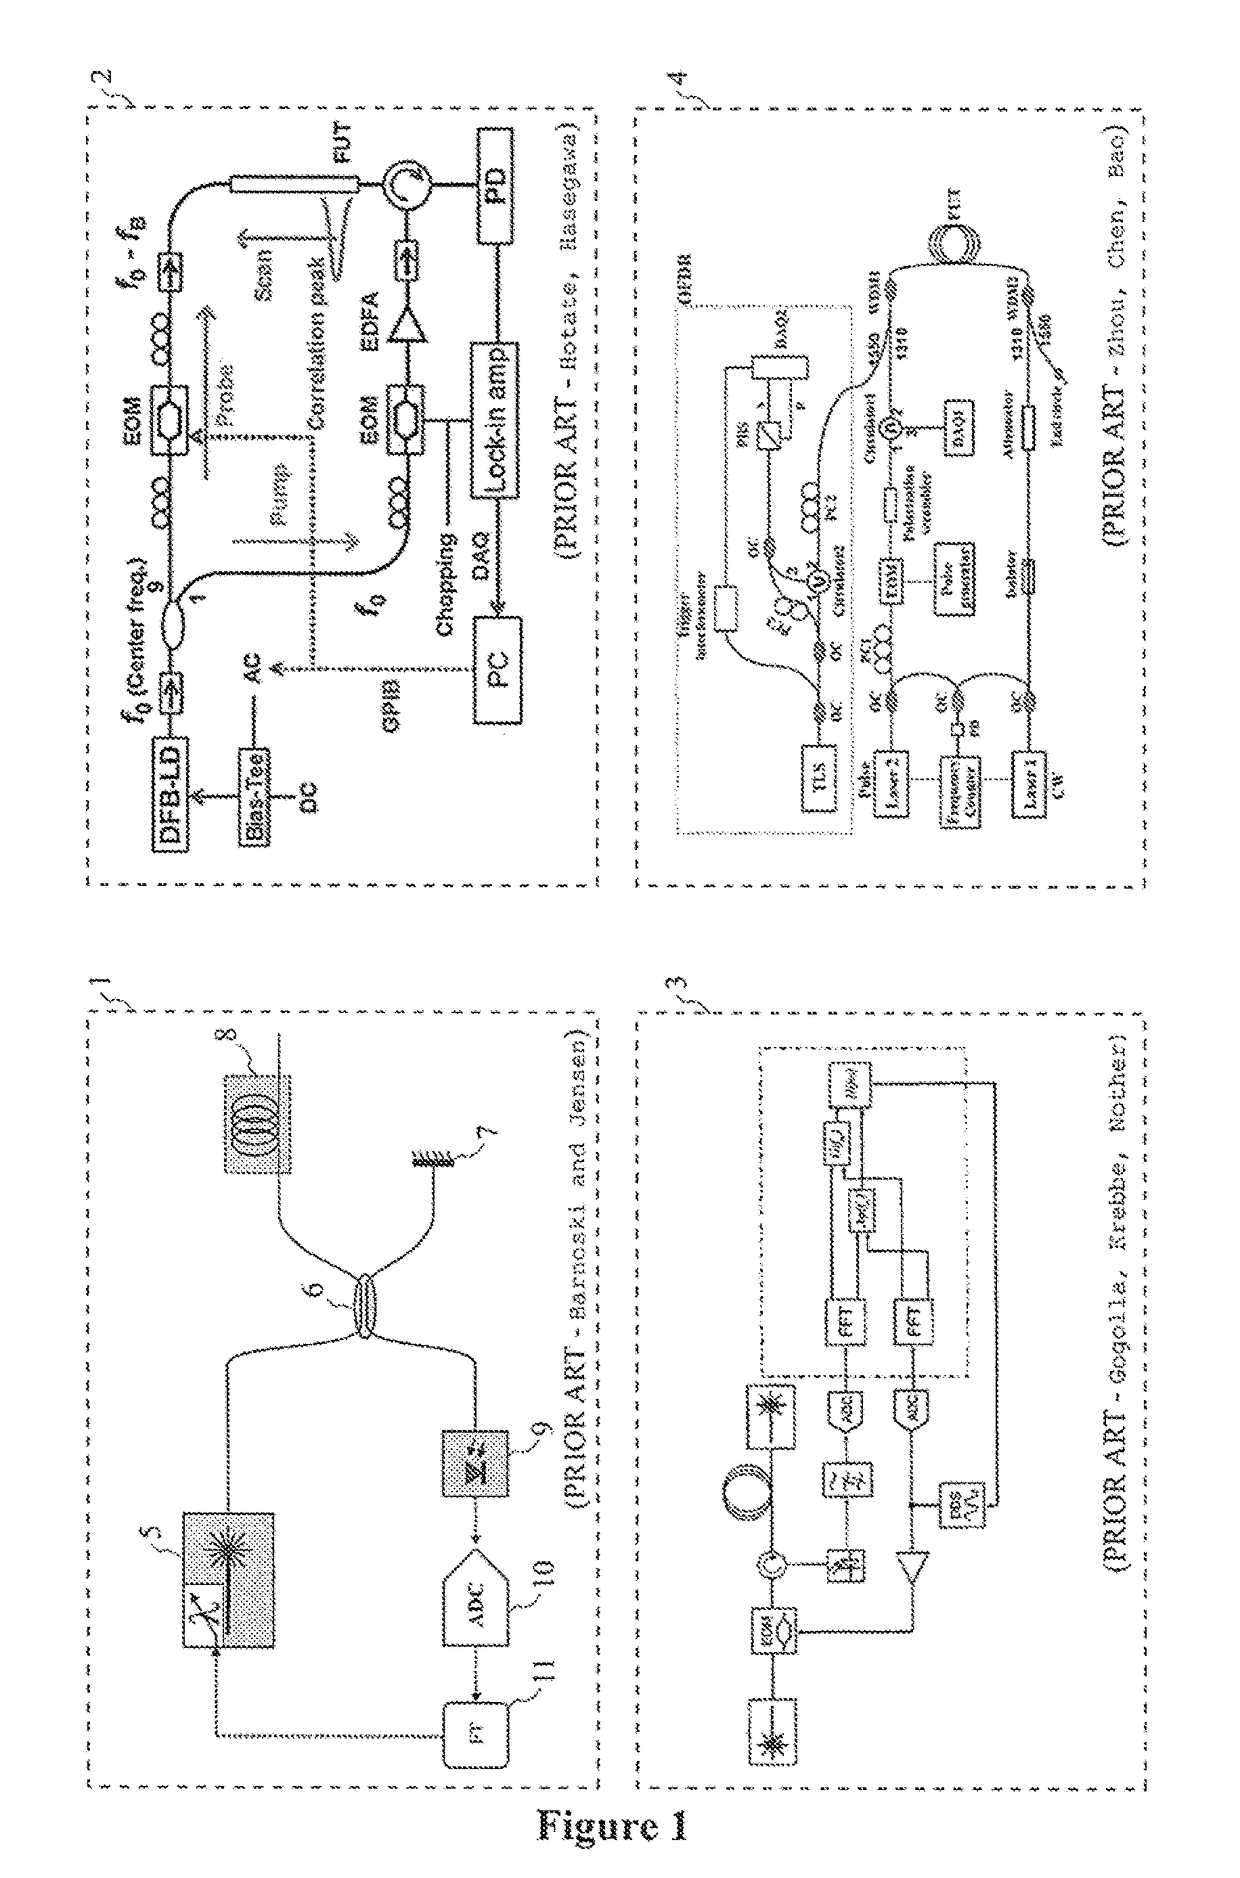 Apparatus for interrogating distributed optical fibre sensors using a stimulated brillouin scattering optical frequency-domain interferometer